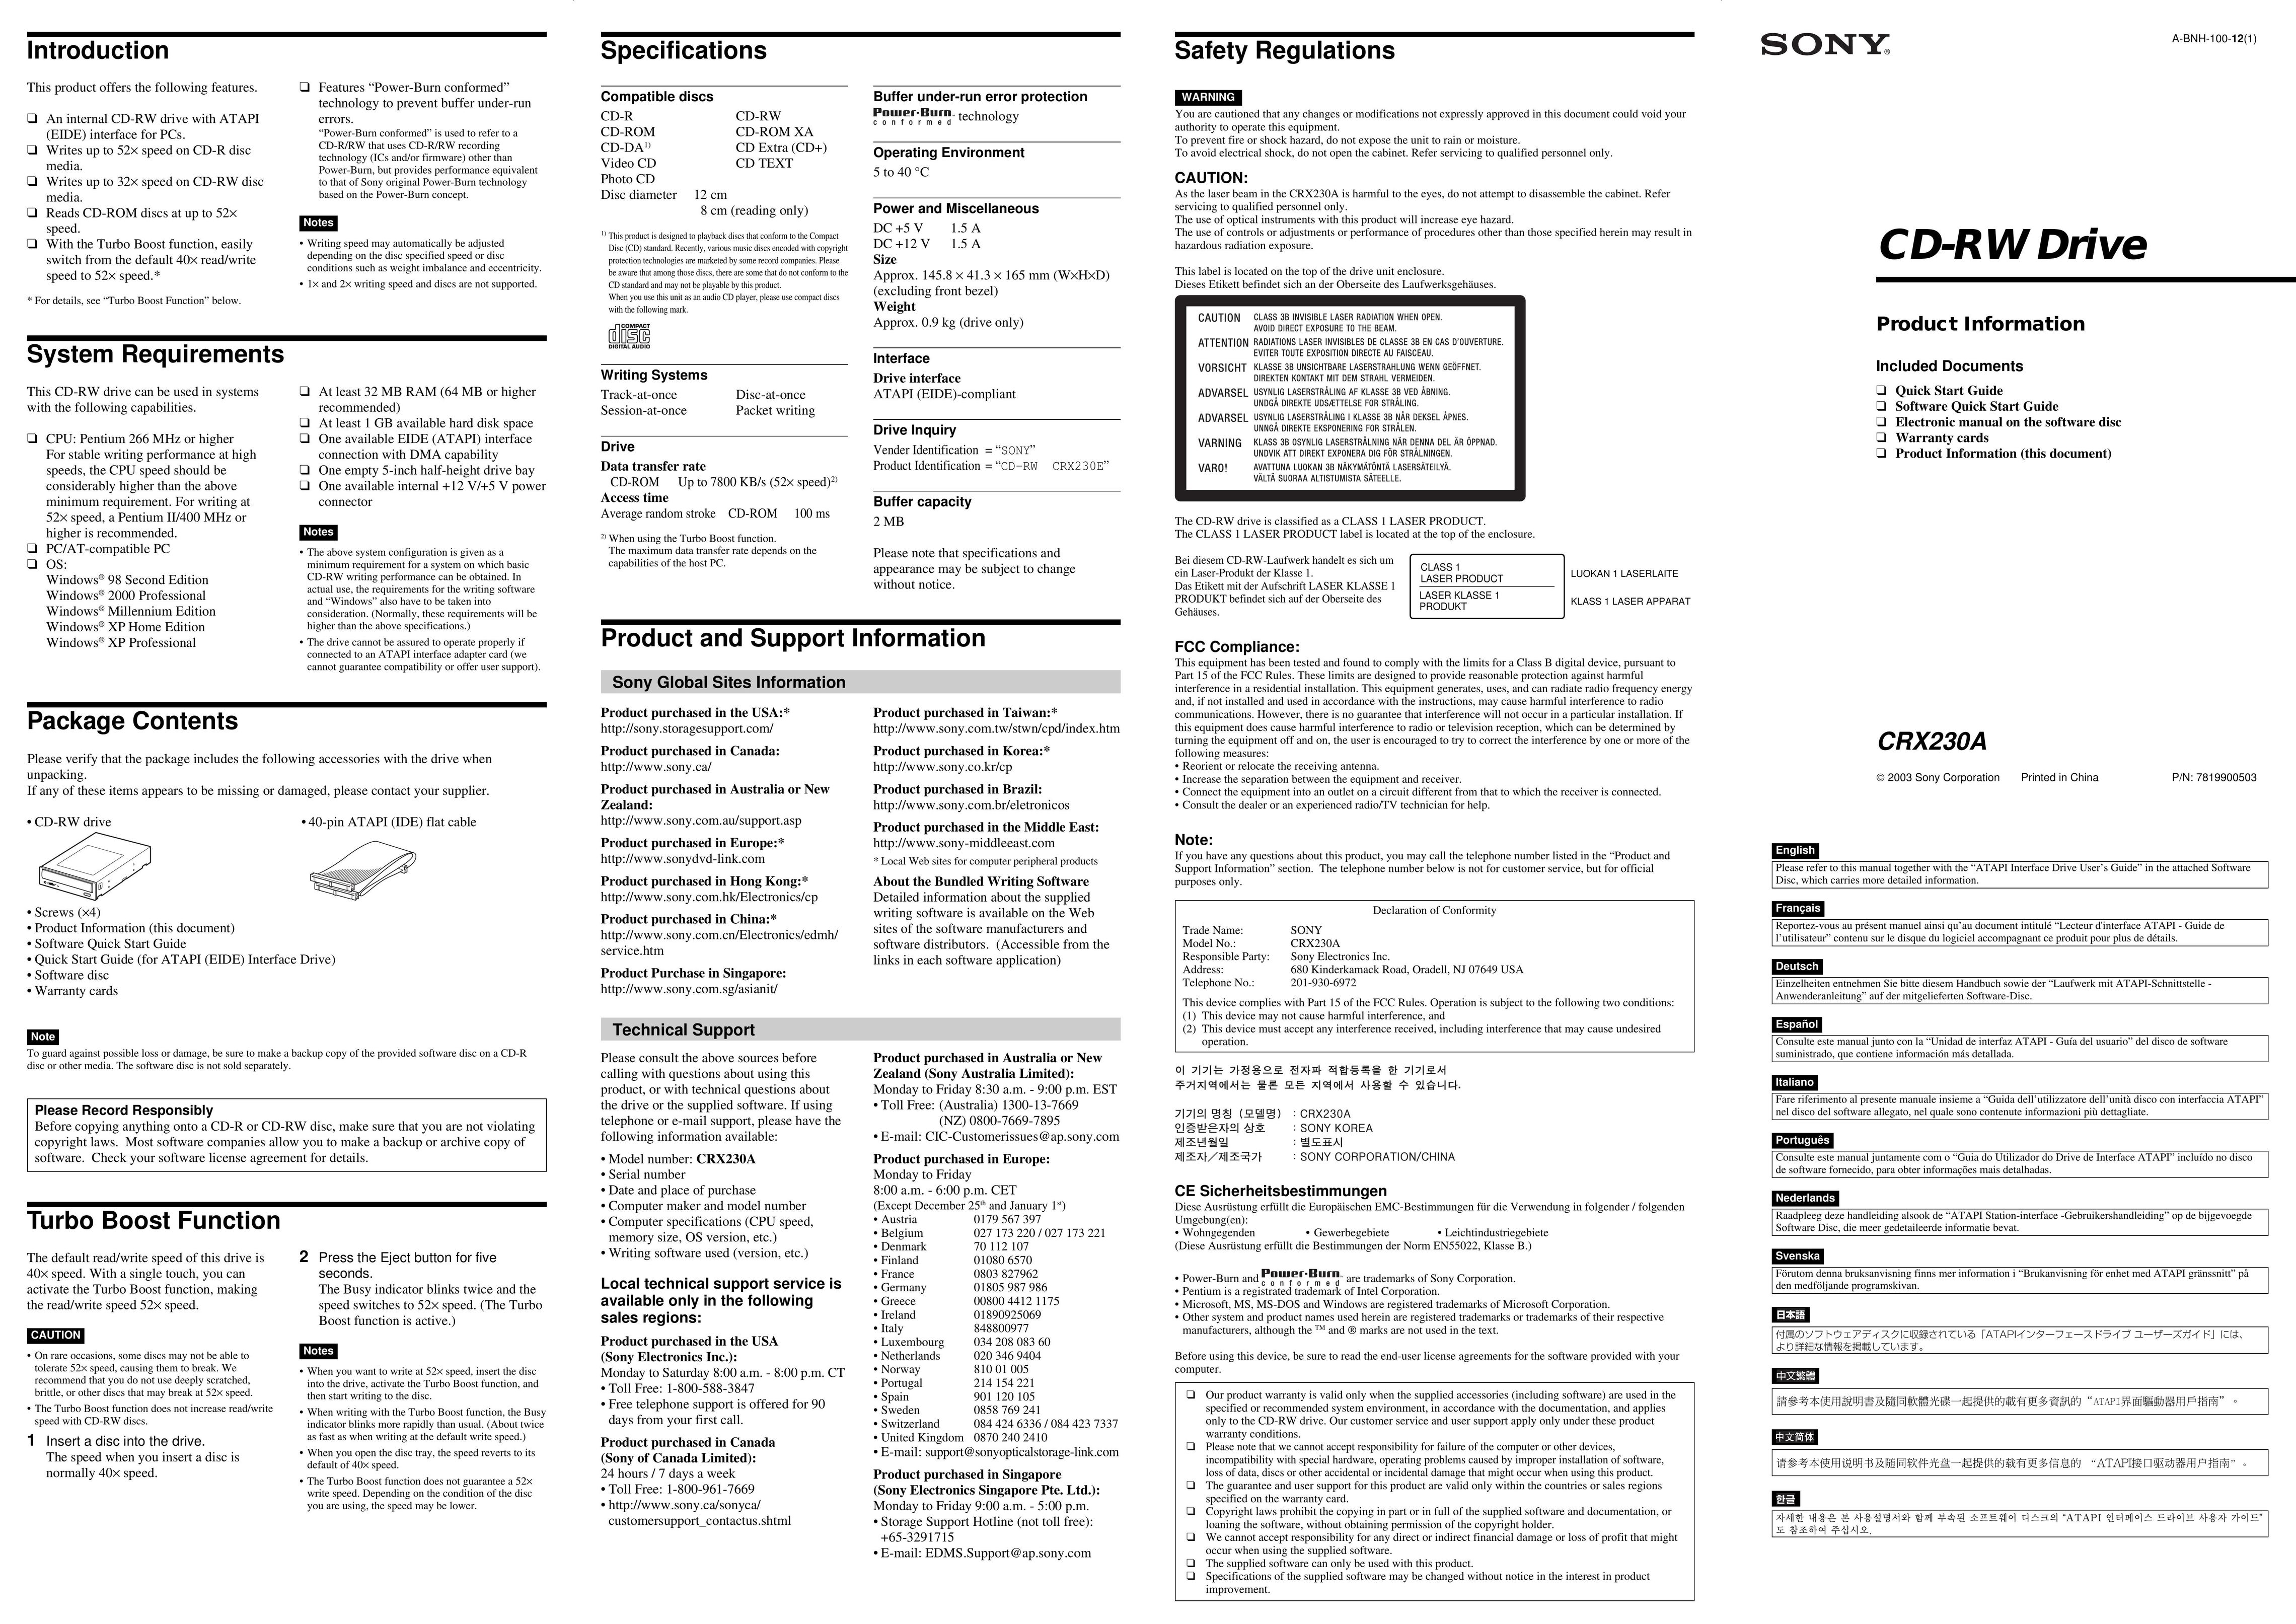 Sony CRX230A Computer Drive User Manual